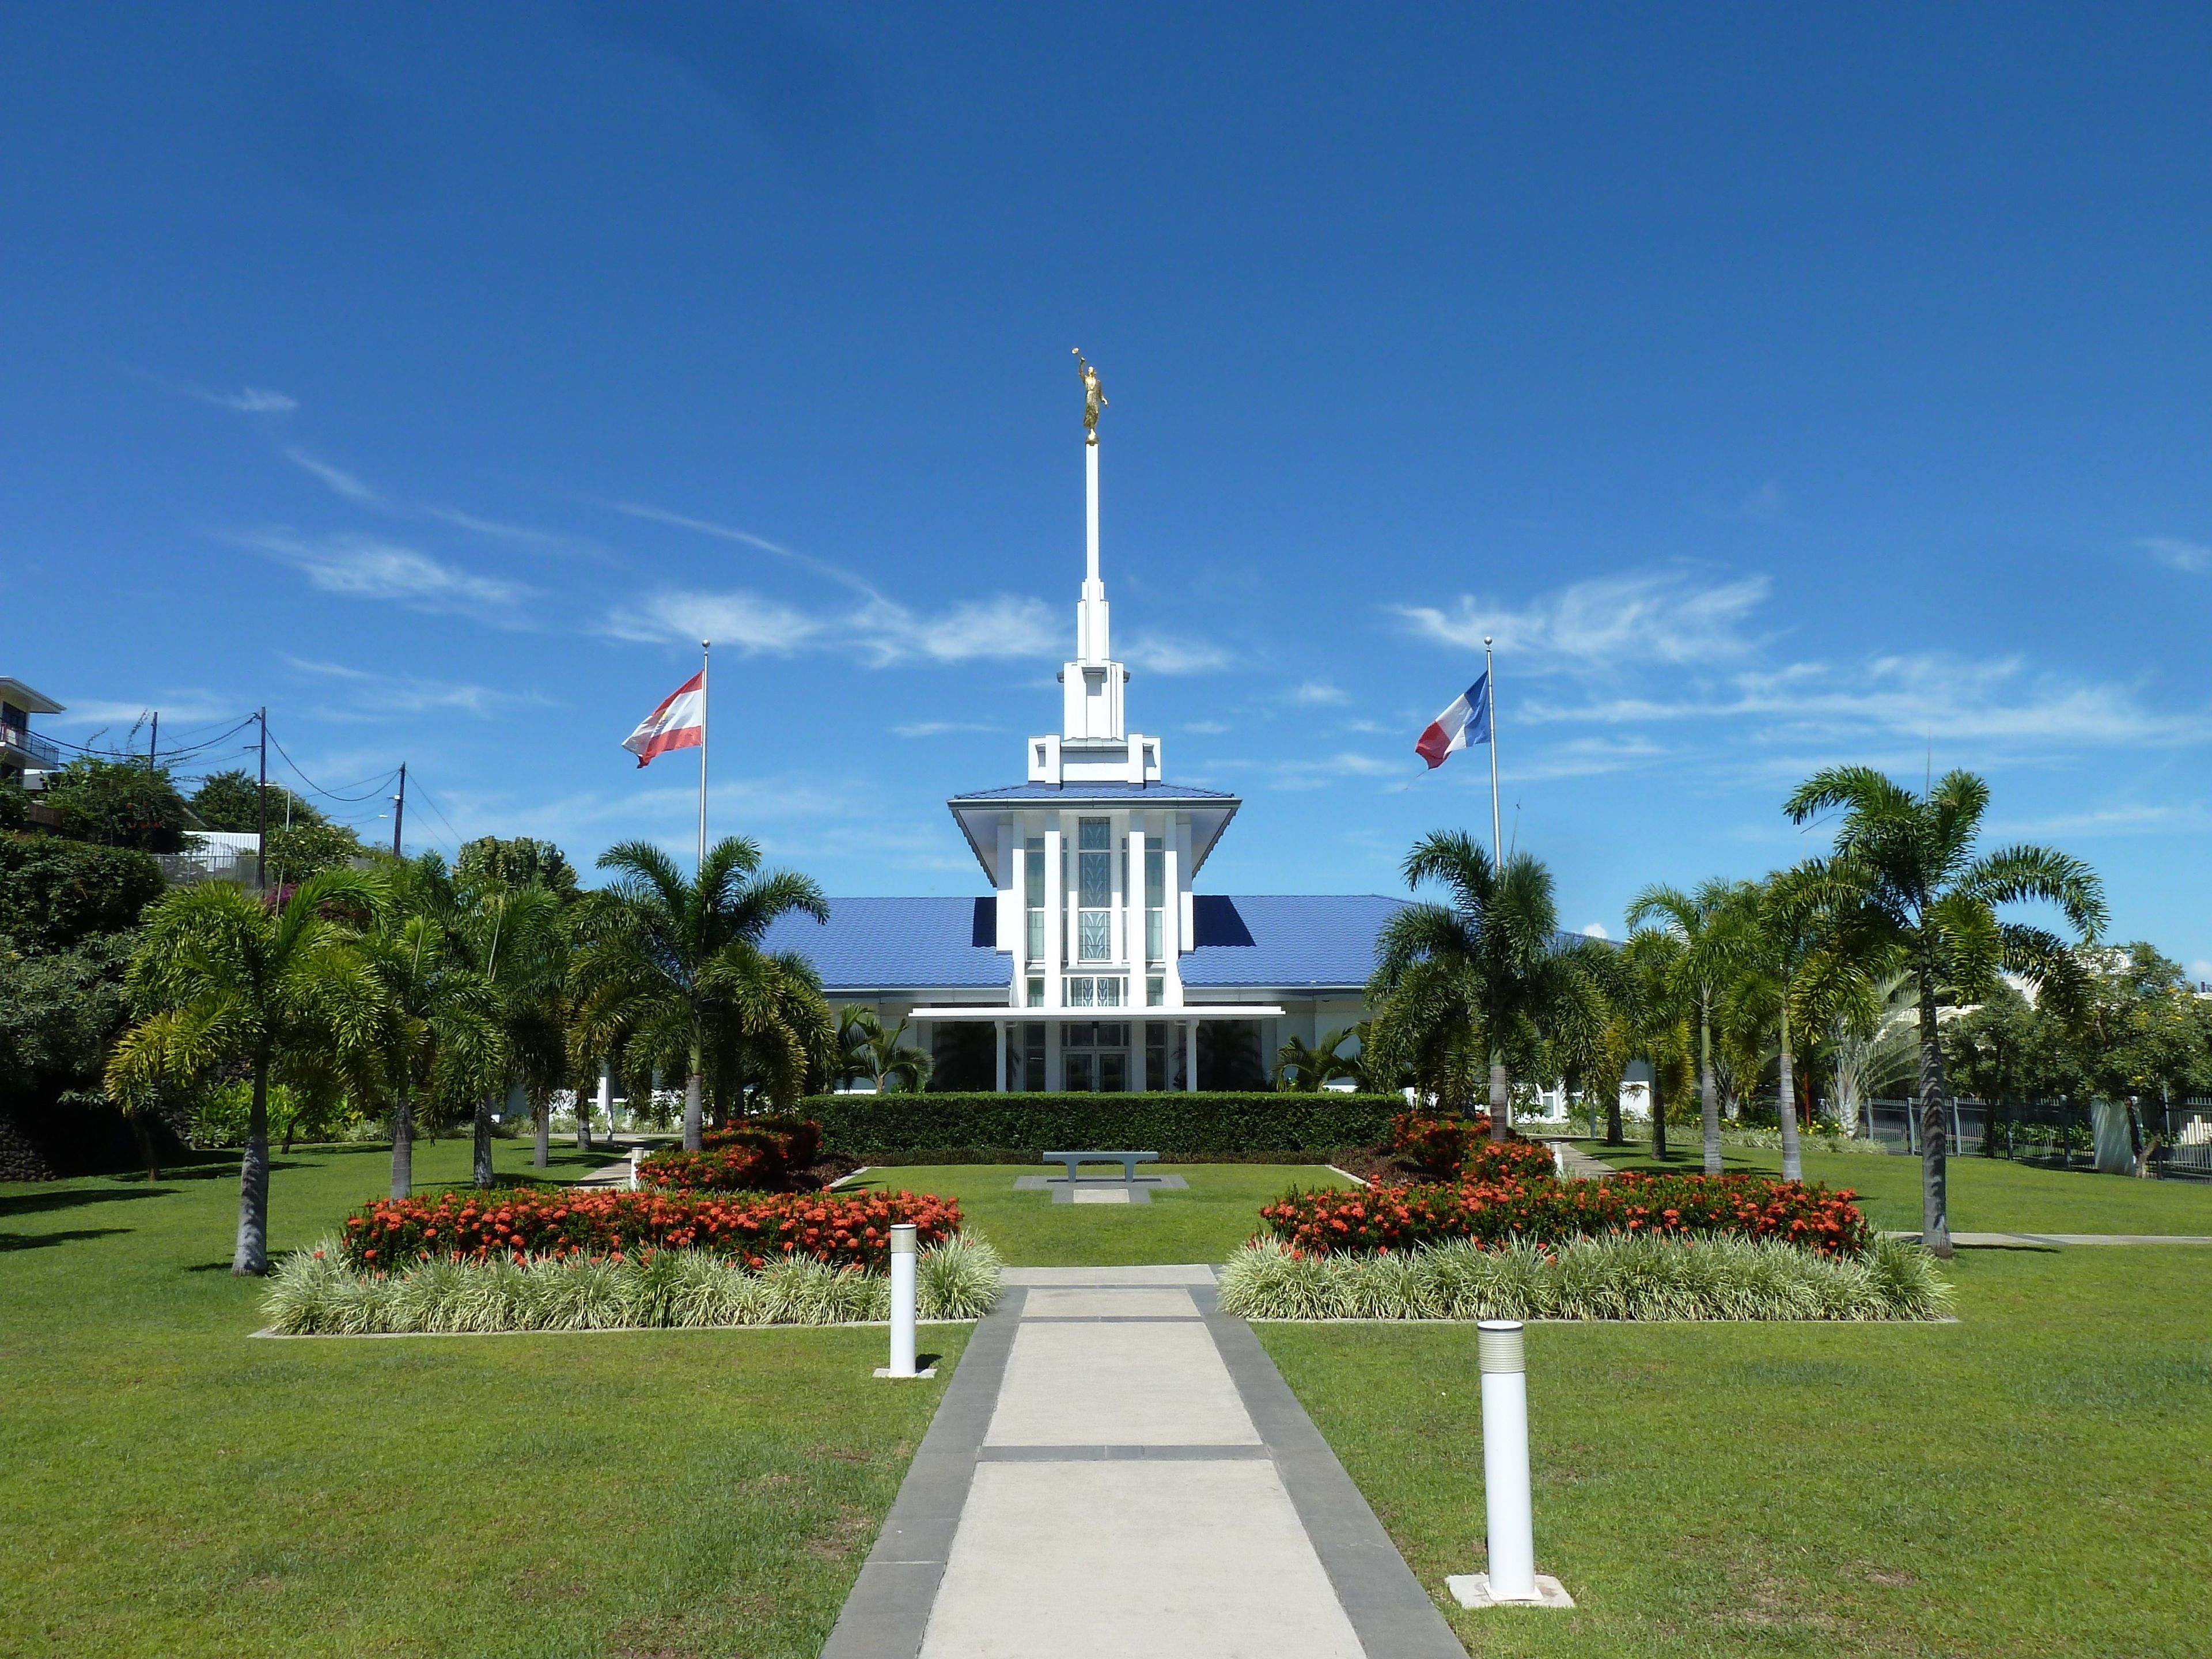 The front of the Papeete Tahiti Temple and grounds.